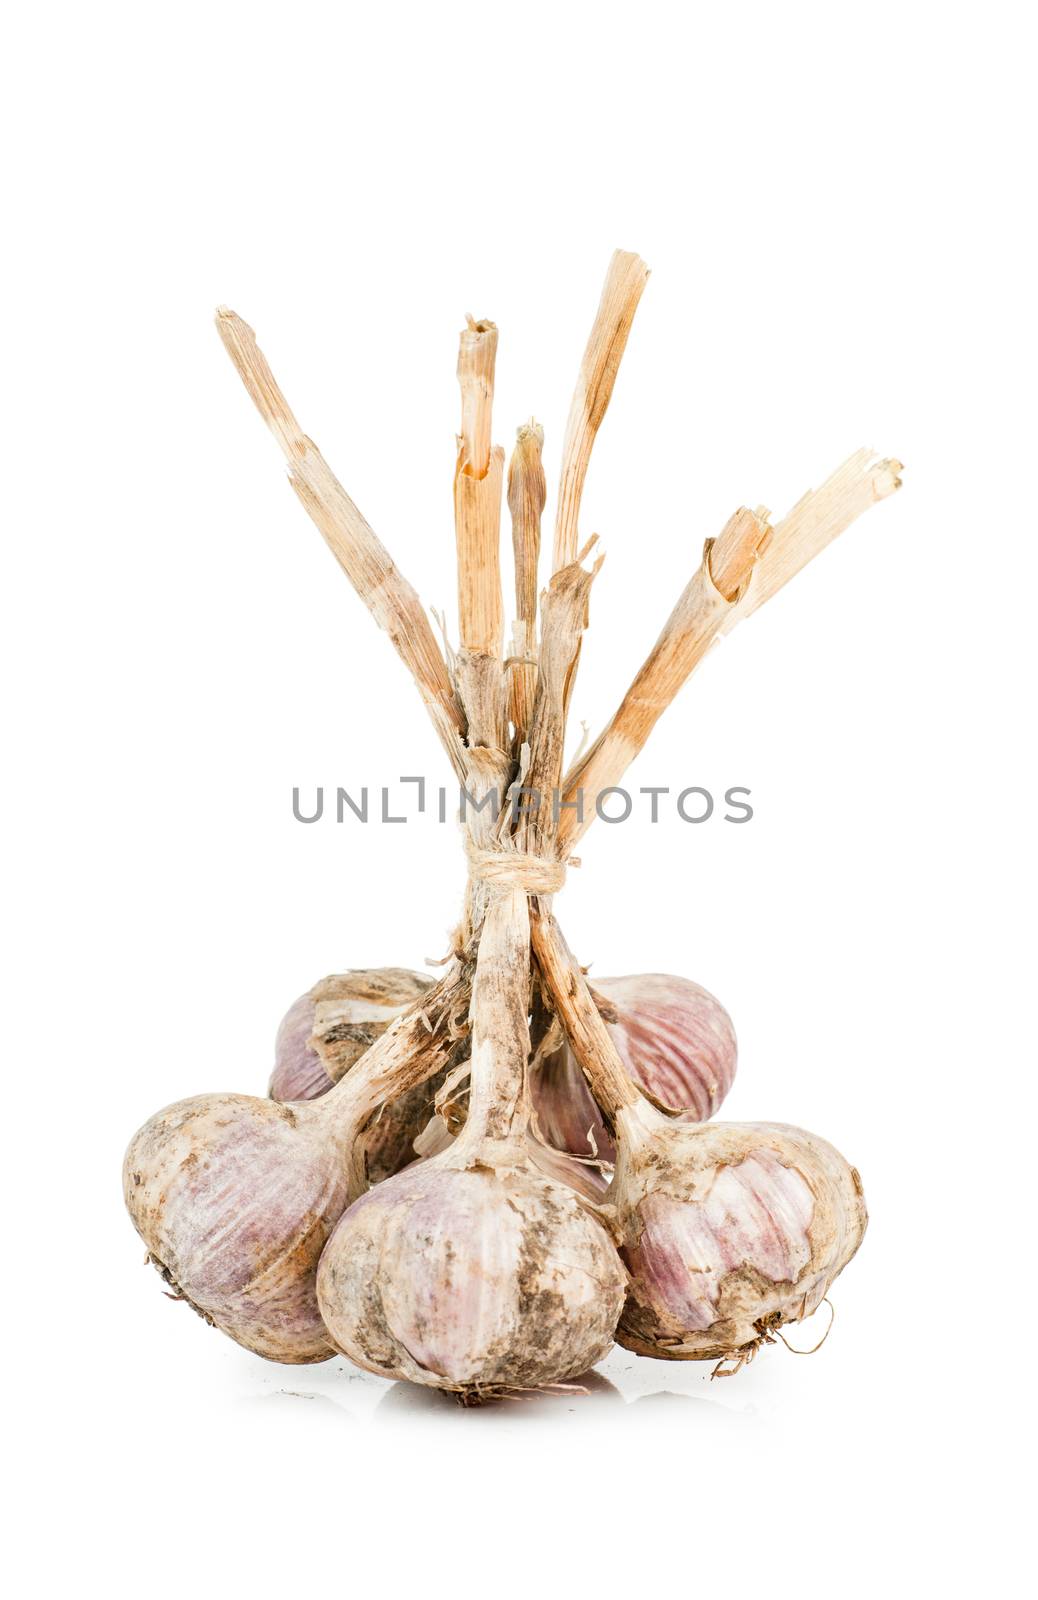 Closeup view of bunch of garlic isolated on white background.